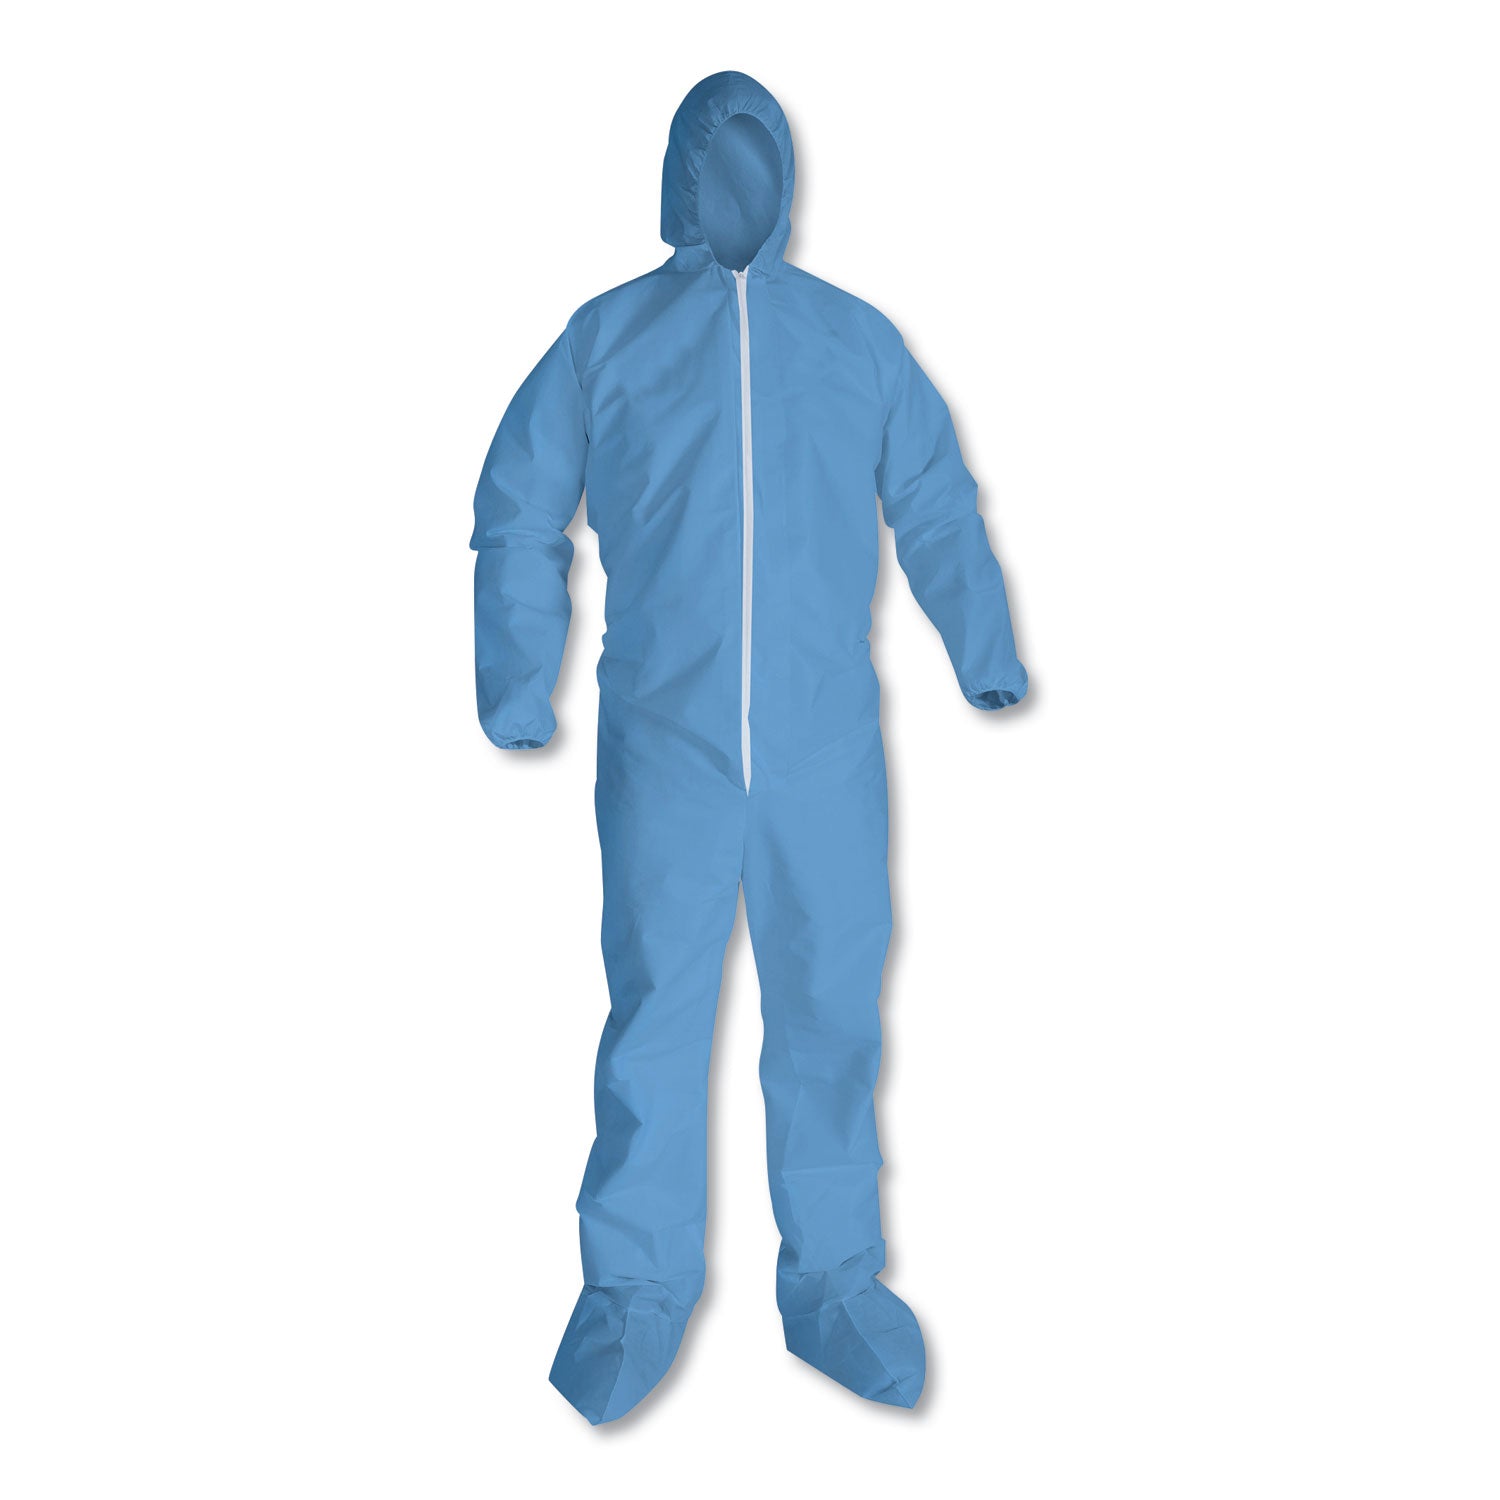 A65 Zipper Front Hood and Boot Flame-Resistant Coveralls, Elastic Wrist and Ankles, 2X-Large,Blue, 25/Carton - 